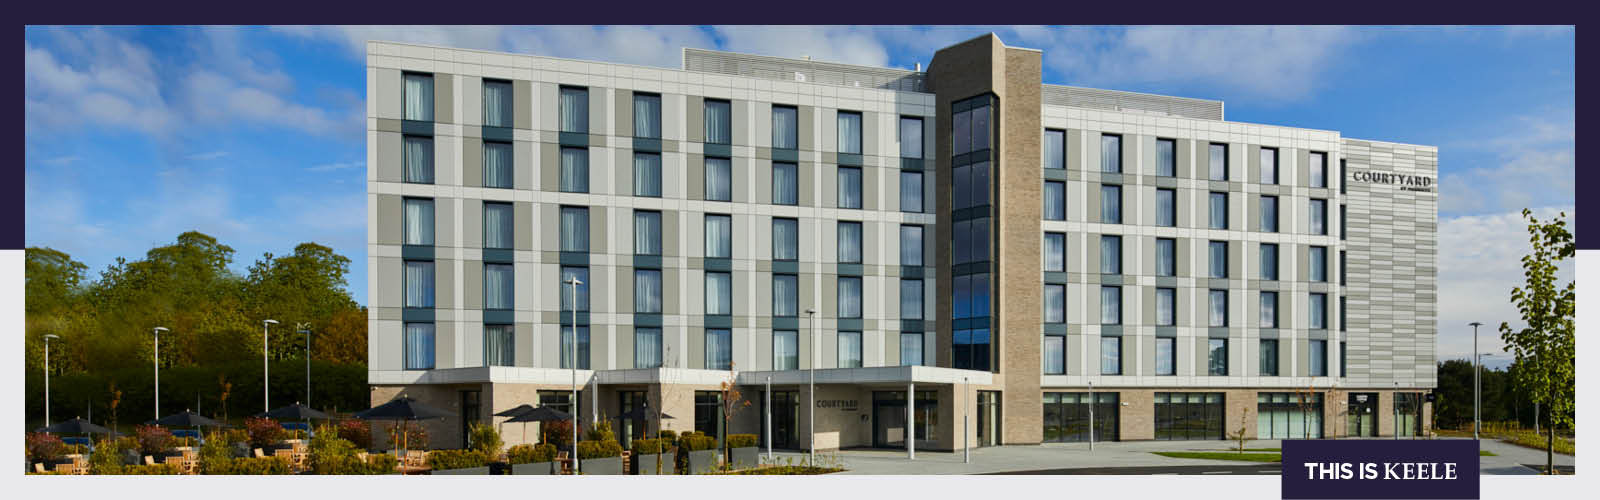 Courtyard by Marriott at Keele